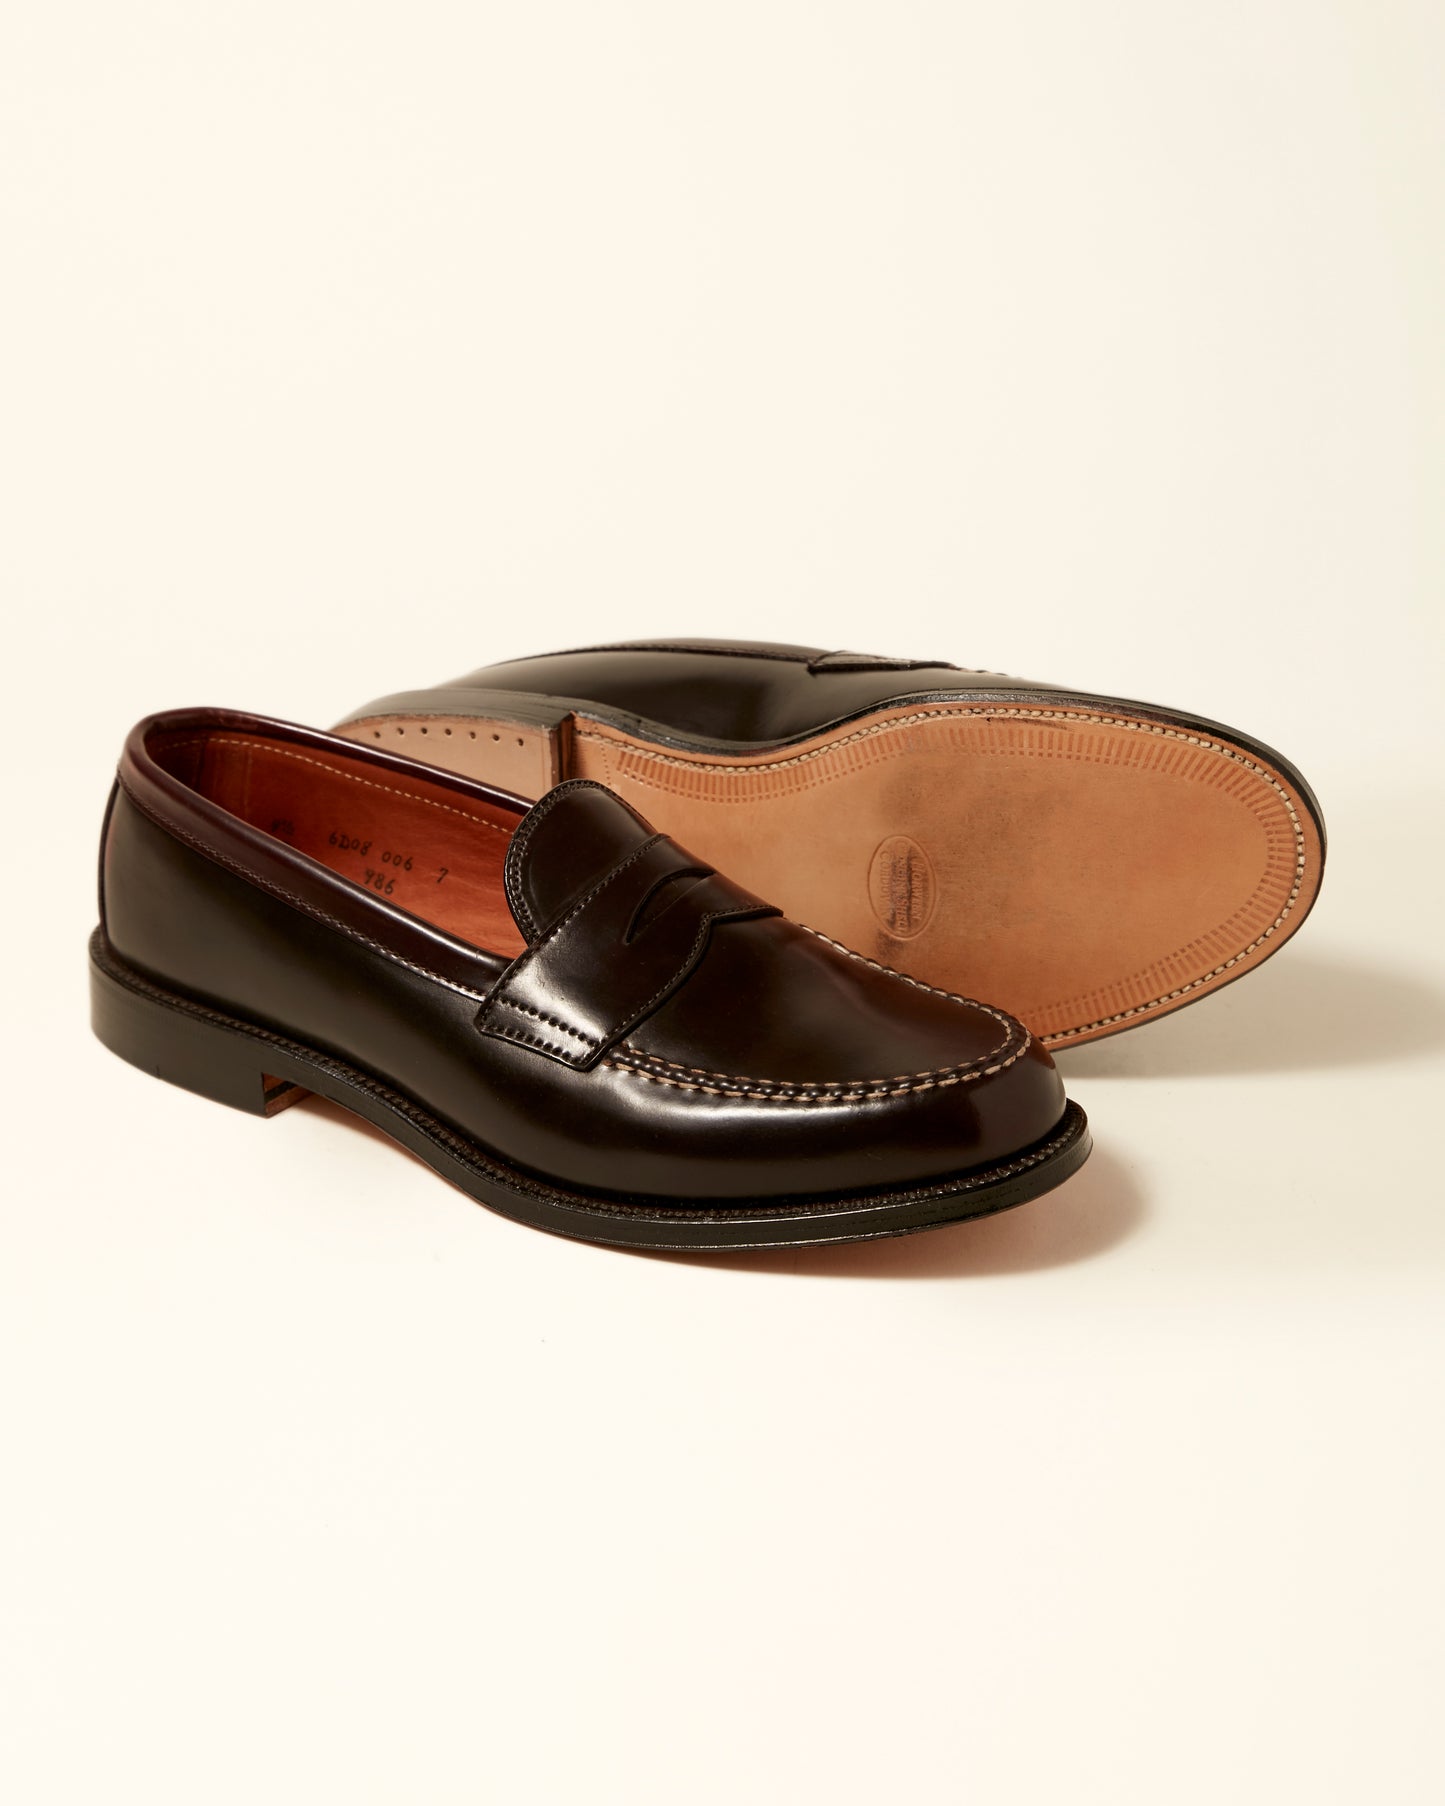 986 Leisure Handsewn Loafer in Color 8 Shell Cordovan, Van Last